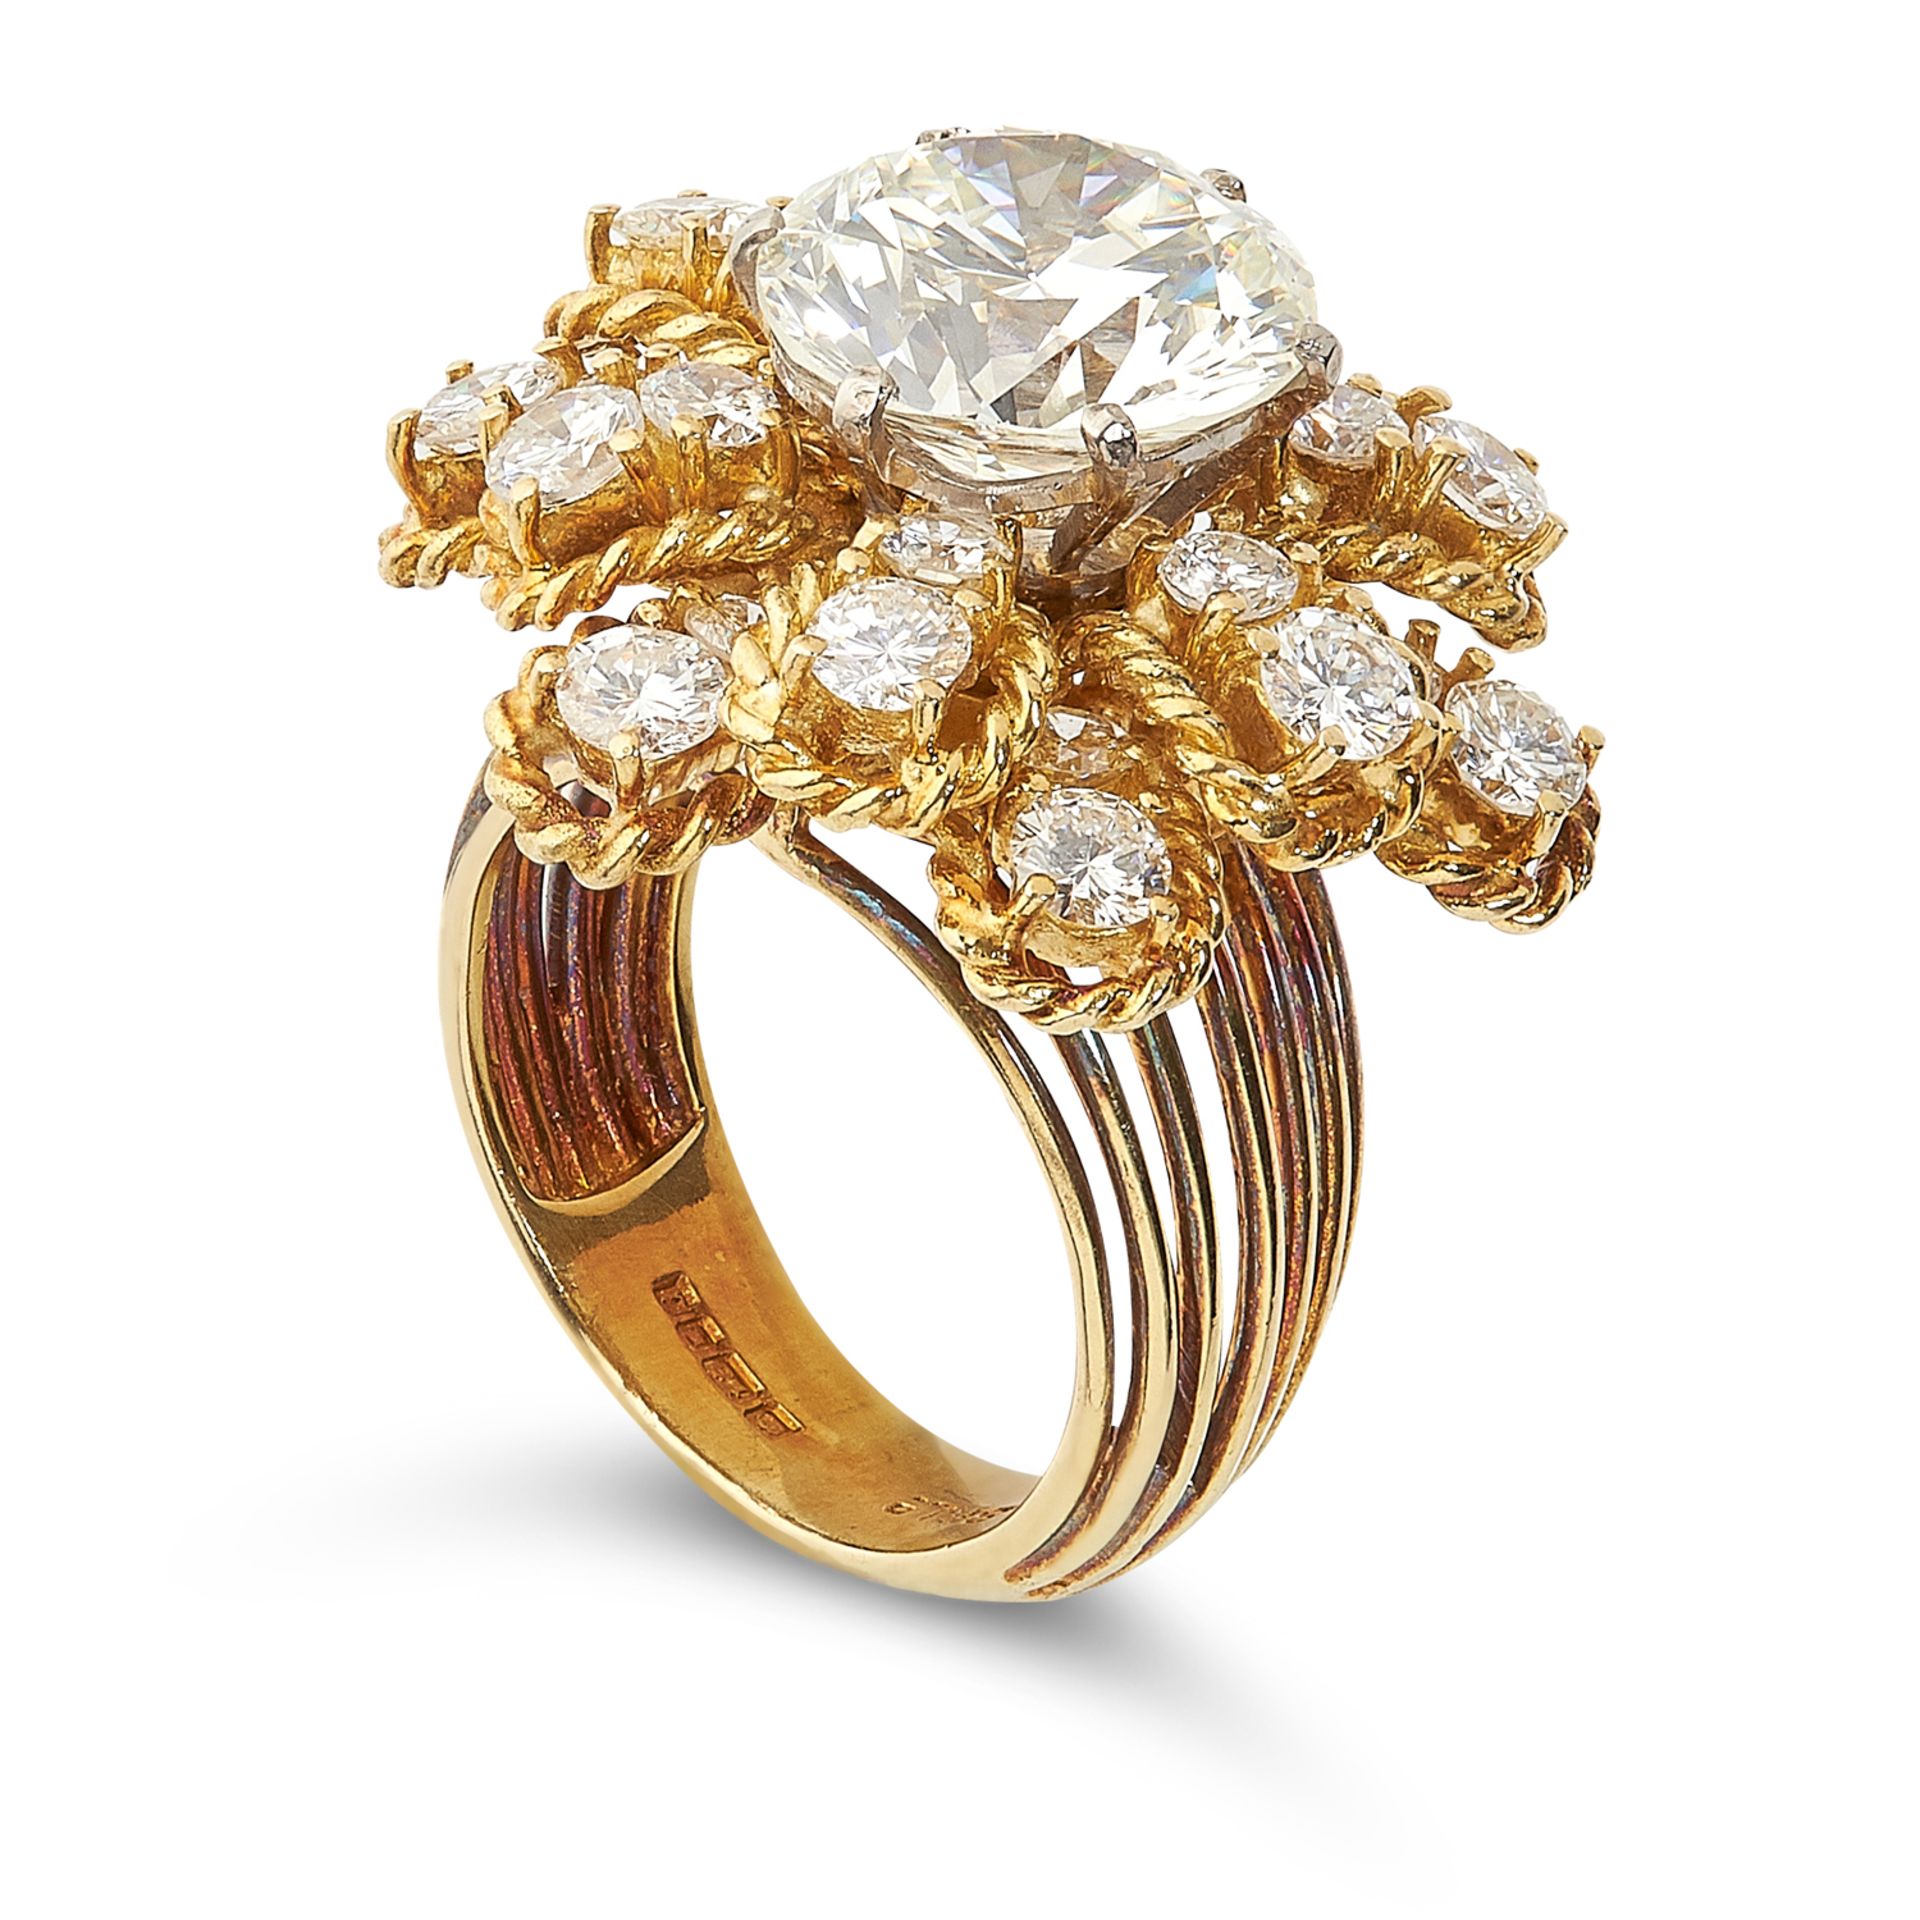 A VINTAGE 4.76 CARAT DIAMOND RING, BEN ROSENFELD 1964 in 18ct yellow gold, set with a central - Image 4 of 4